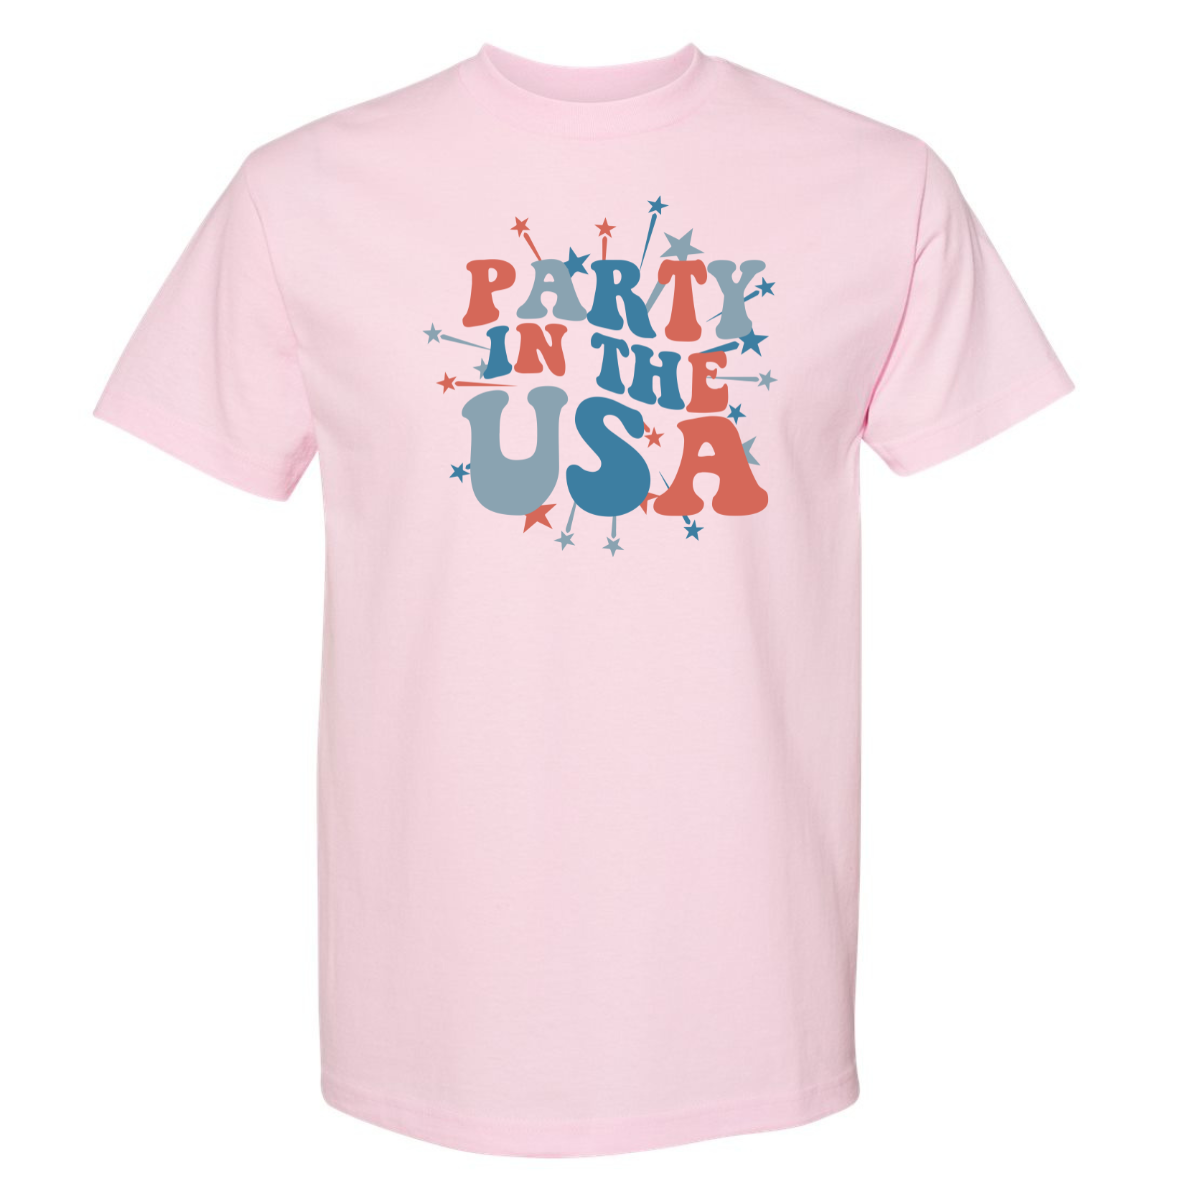 Fourth of July Tops Party in the USA - Premium Printed Apparel